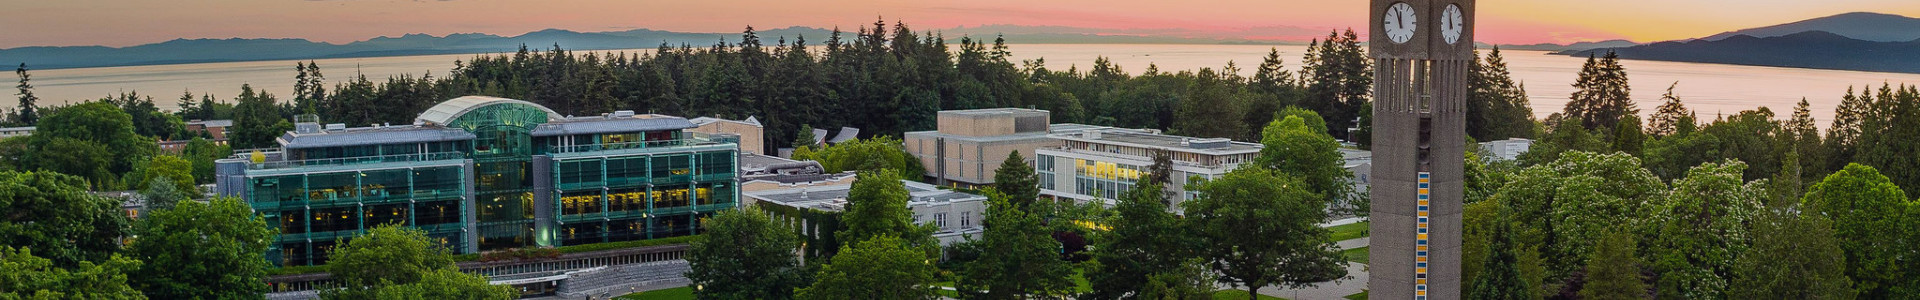 Aerial view of UBC Vancouver campus with forest in the foreground and mountains in the background